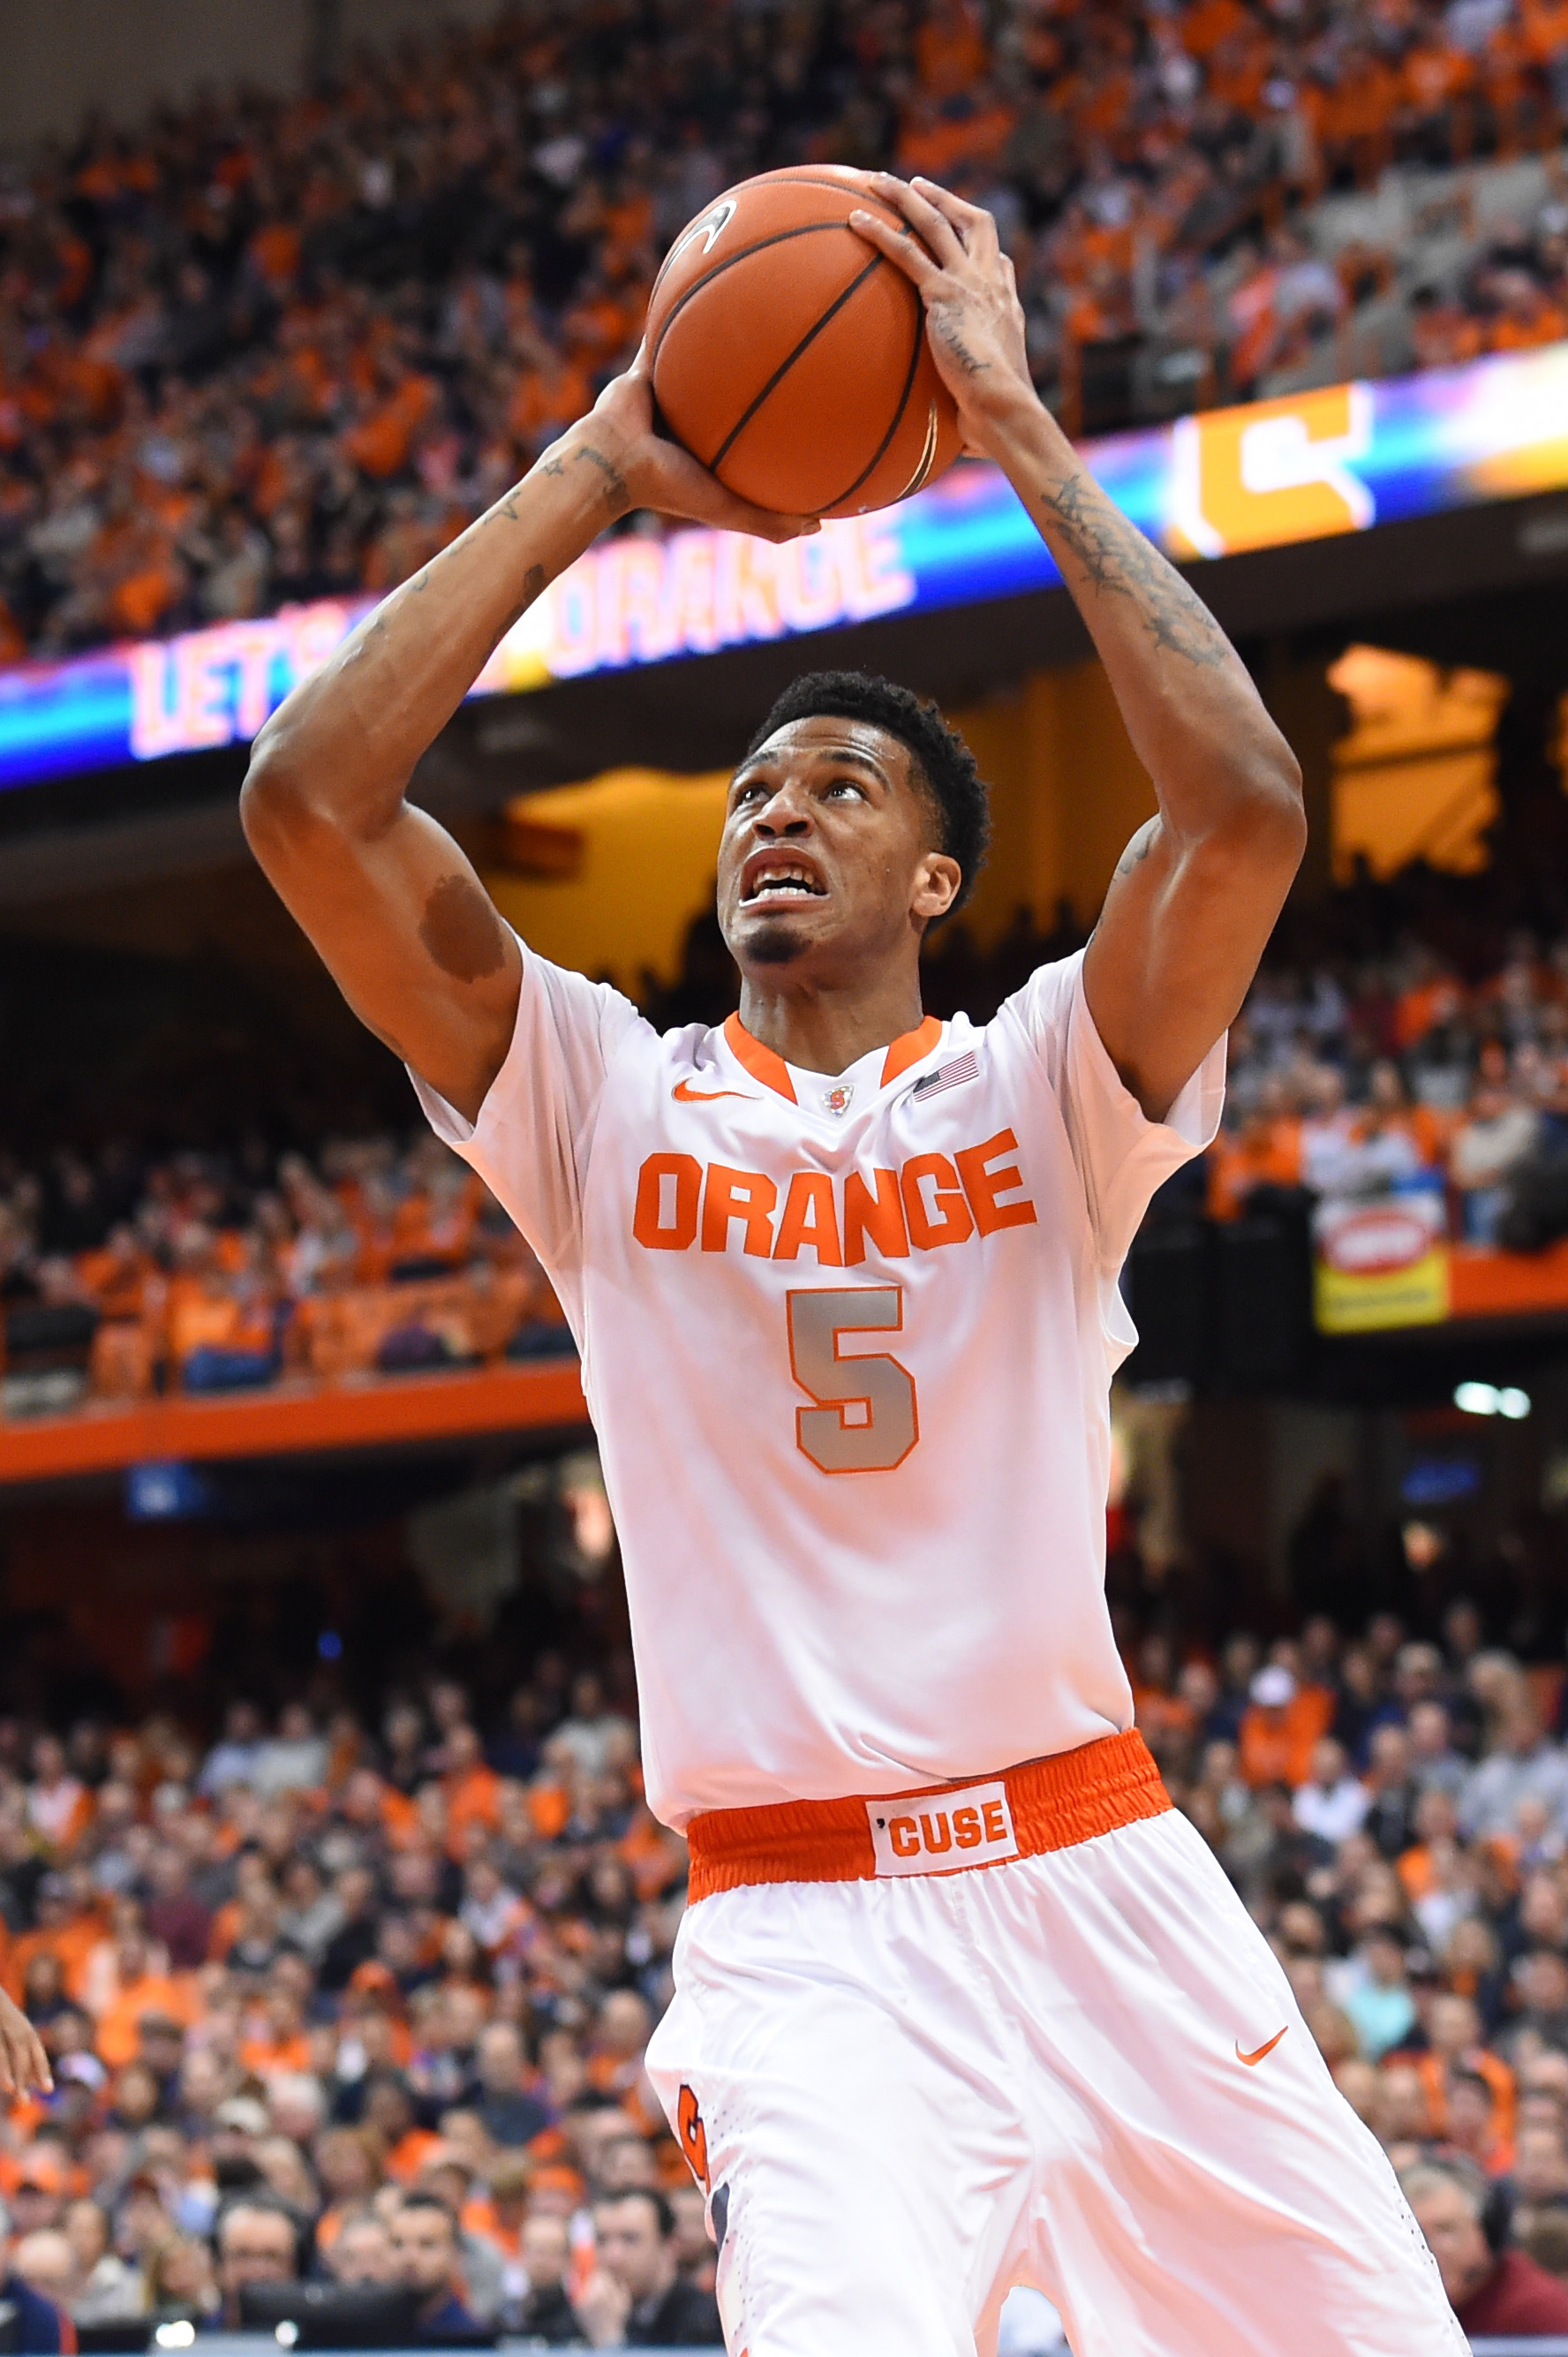 Jan 11, 2015; Syracuse, NY, USA; Syracuse Orange forward Chris McCullough (5) shoots the ball against the Florida State Seminoles during the first half at the Carrier Dome.  Syracuse defeated Florida State 70-57.  Mandatory Credit: Rich Barnes-USA TODAY Sports